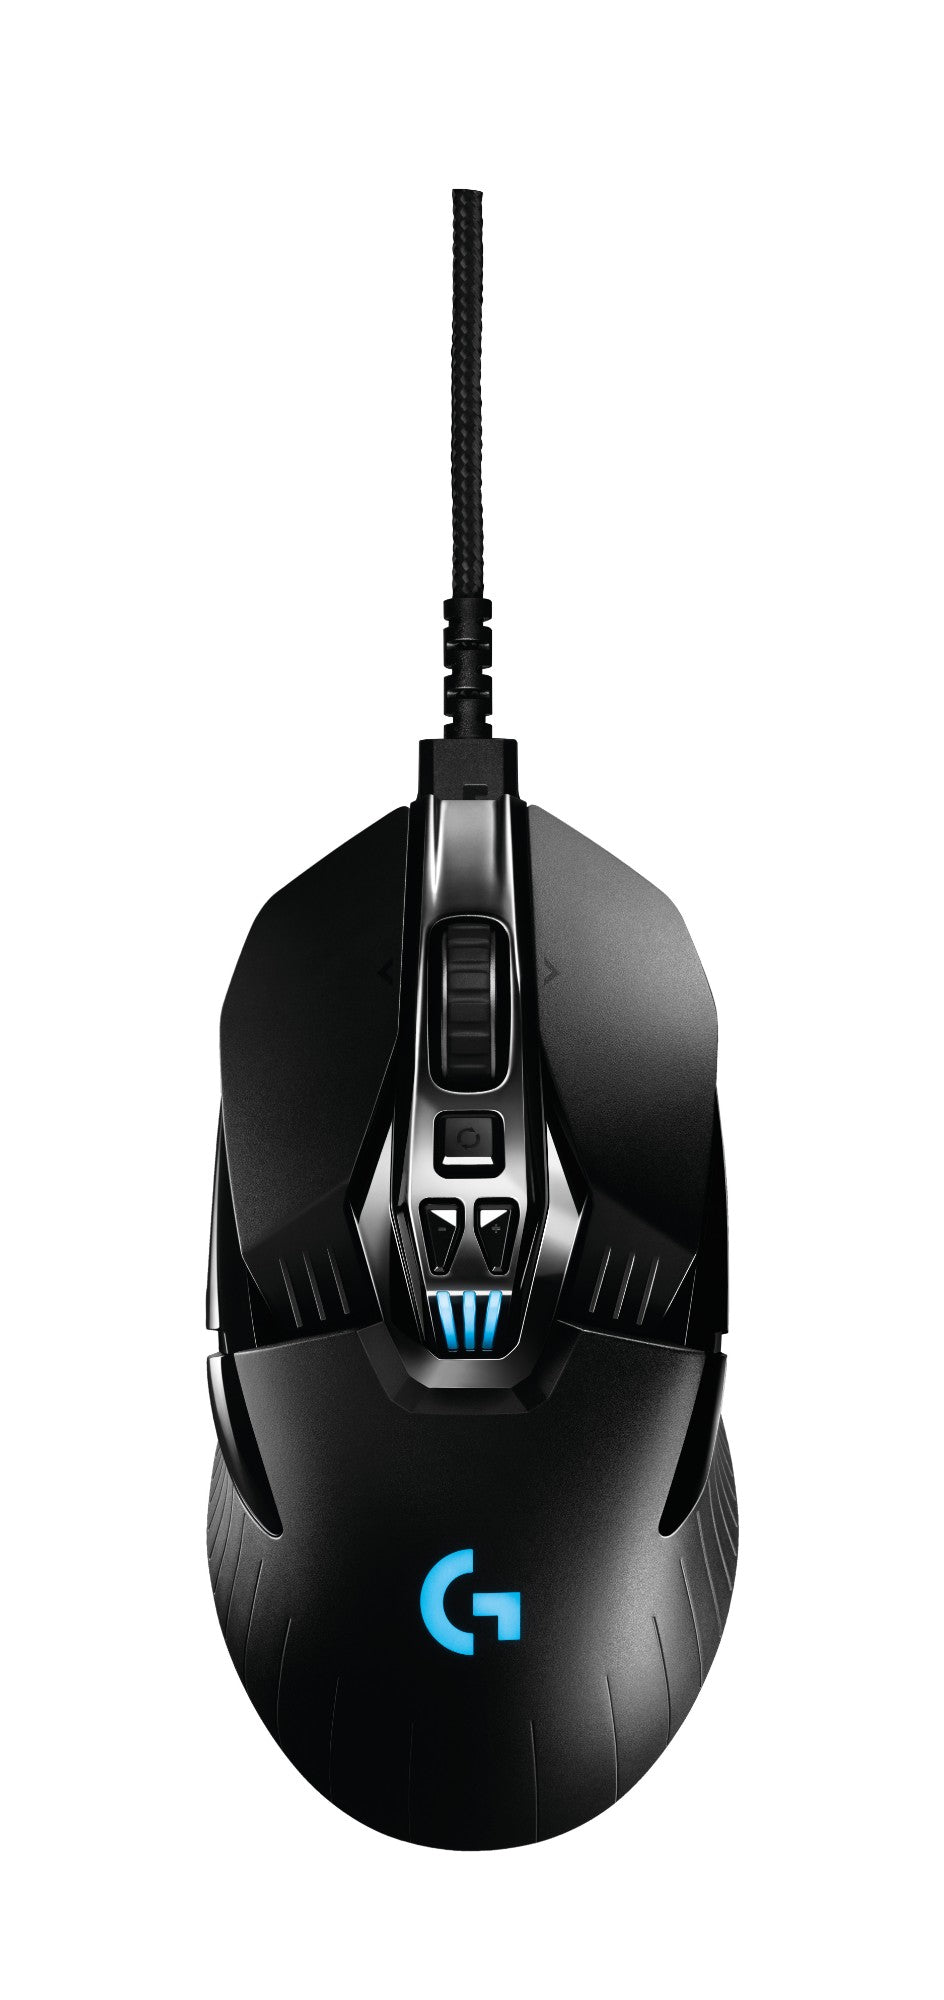 G900 Chaos Spectrum Professional-Grade Wired/Wireless Gaming Mouse